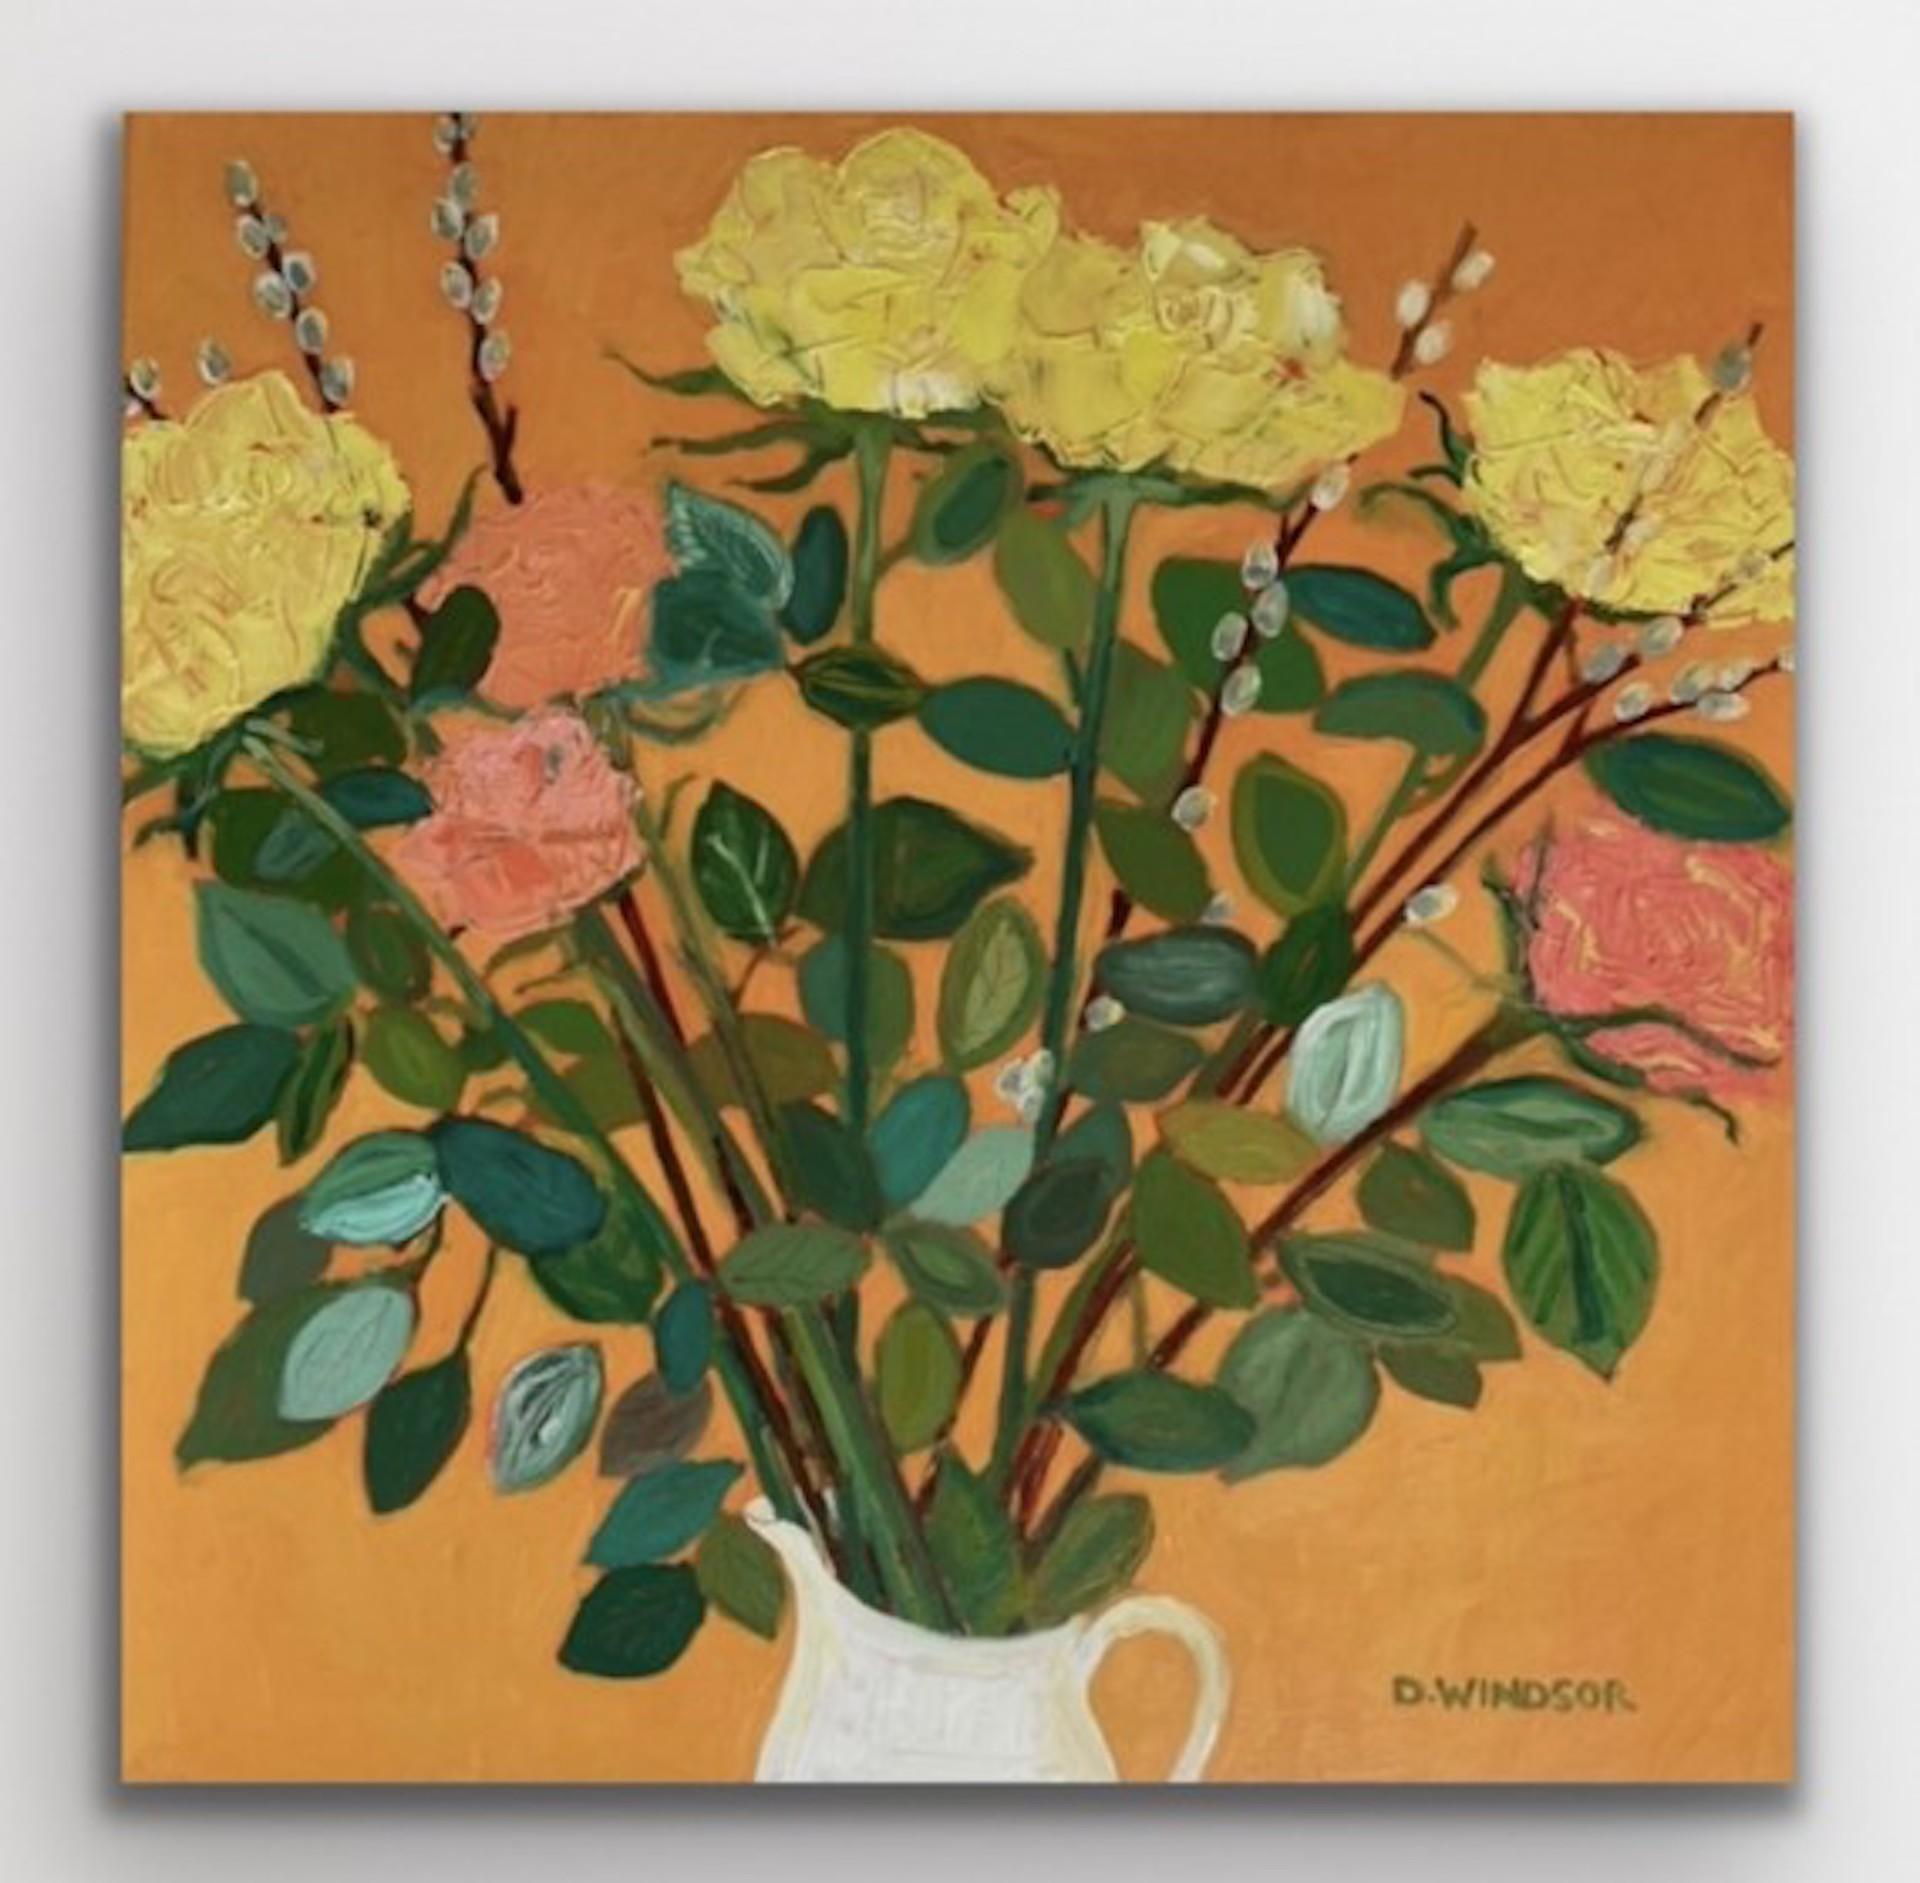 Celebration Roses [2021]
Original
Still Life
Oil Paint on Canvas
Complete Size of Unframed Work: H:70 cm x W:70 cm x D:2cm
Sold Unframed
Please note that insitu images are purely an indication of how a piece may look

Celebration Roses is an